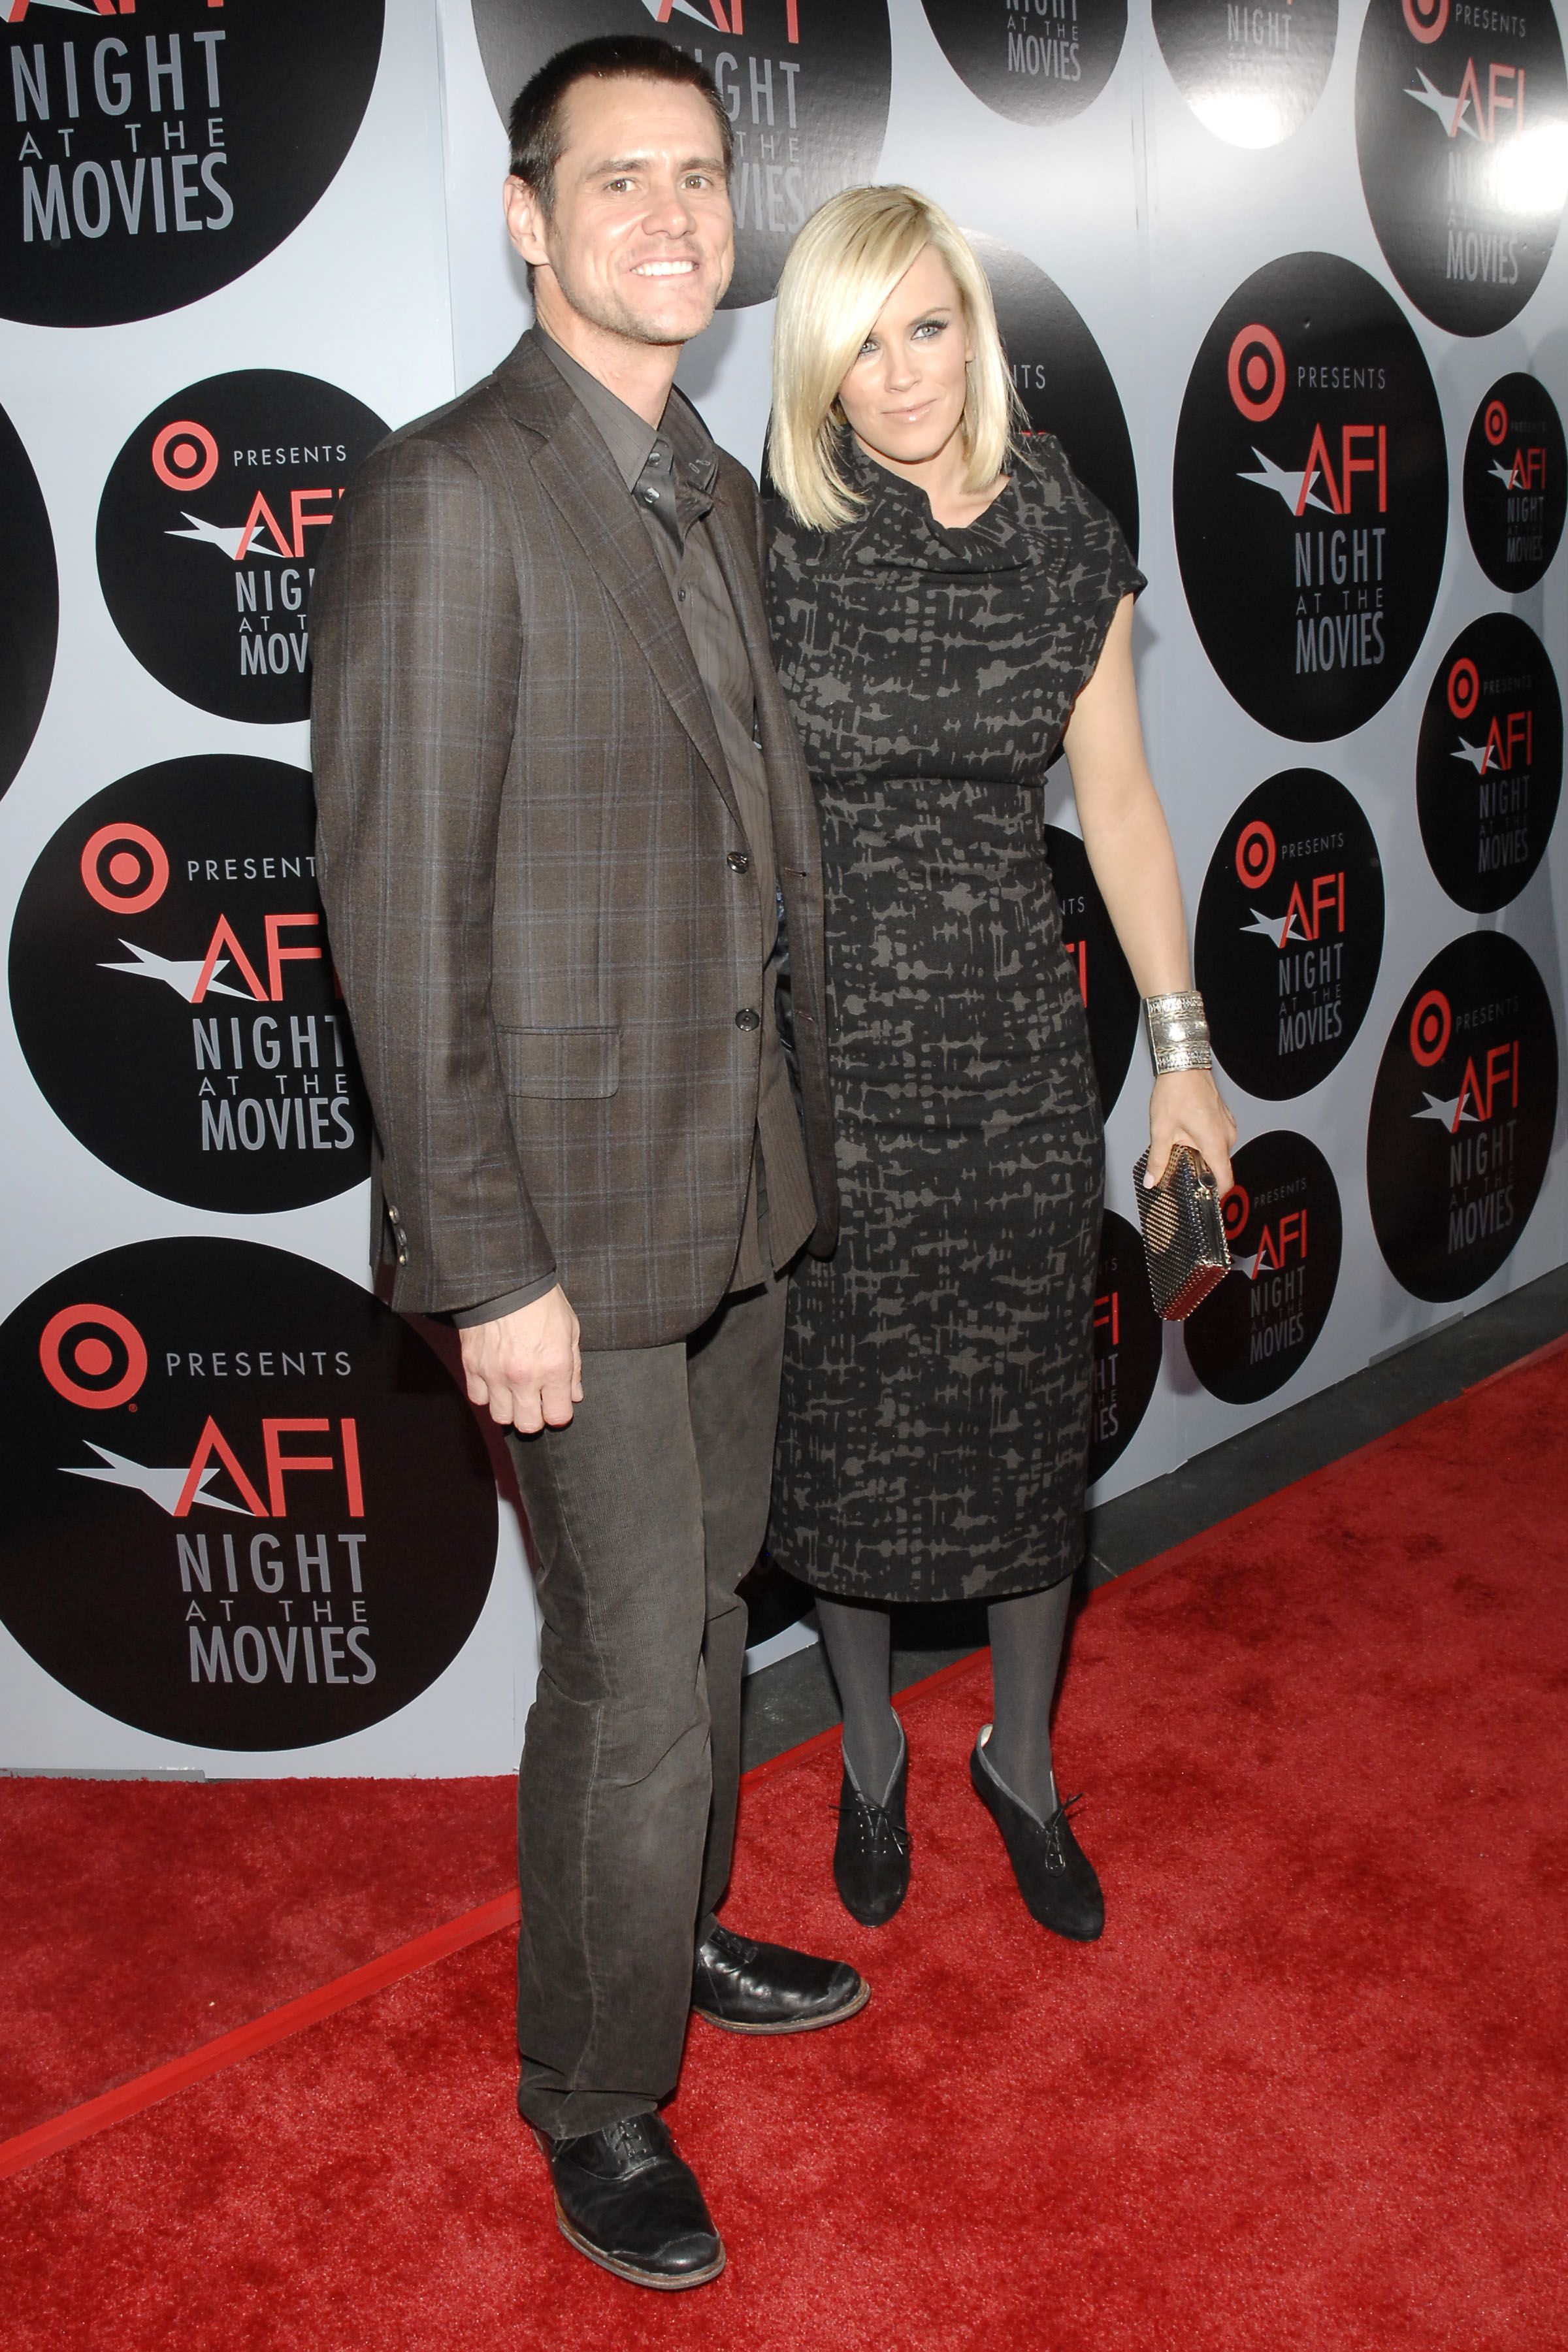 Jim Carrey and Jenny McCarthy during the TARGET Presents AFI Night At The Movies at ArcLight on October 1, 2008 in Hollywood, California. | Source: Getty Images